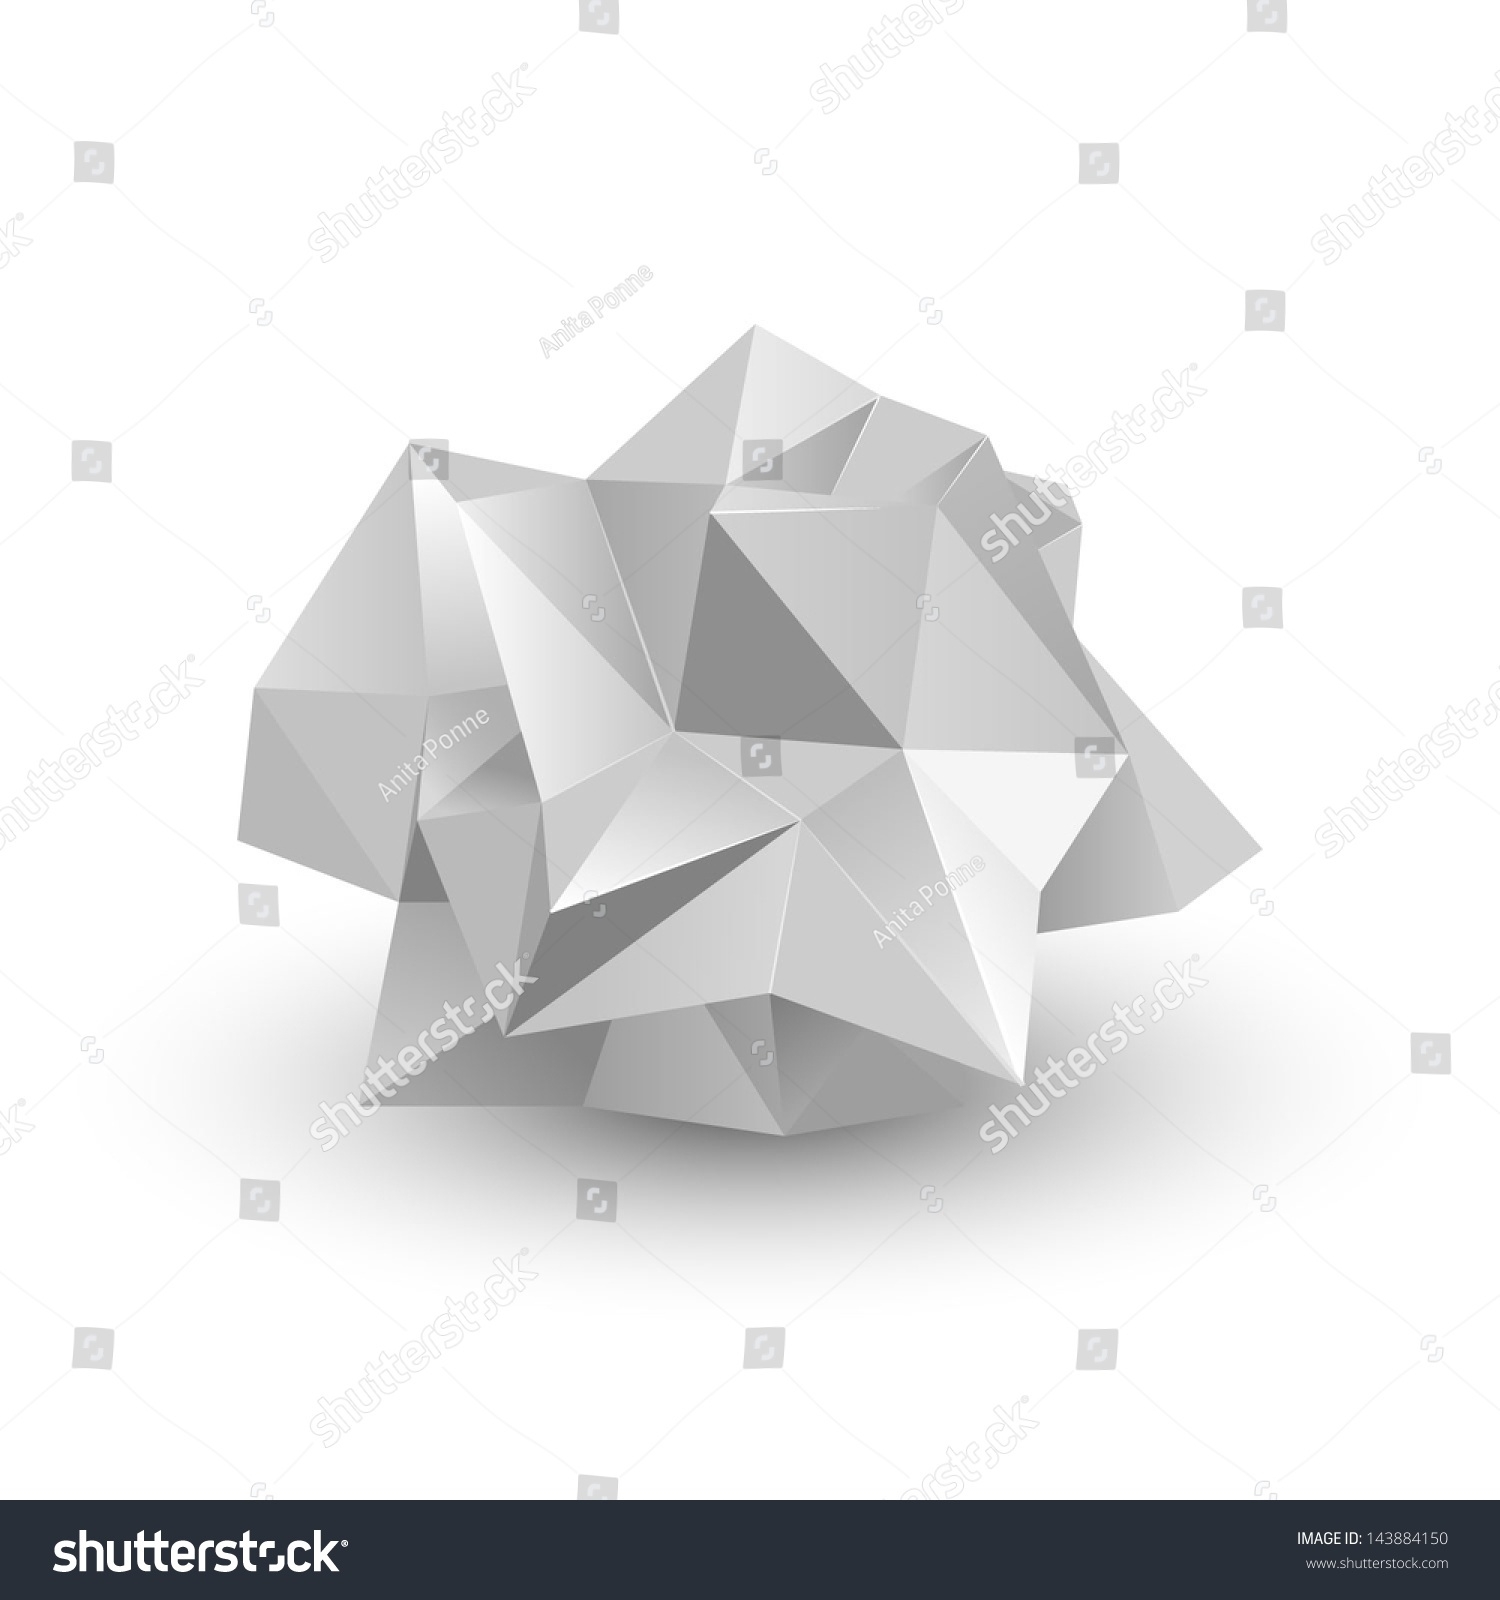 Crumpled Paper Vector | World of Label